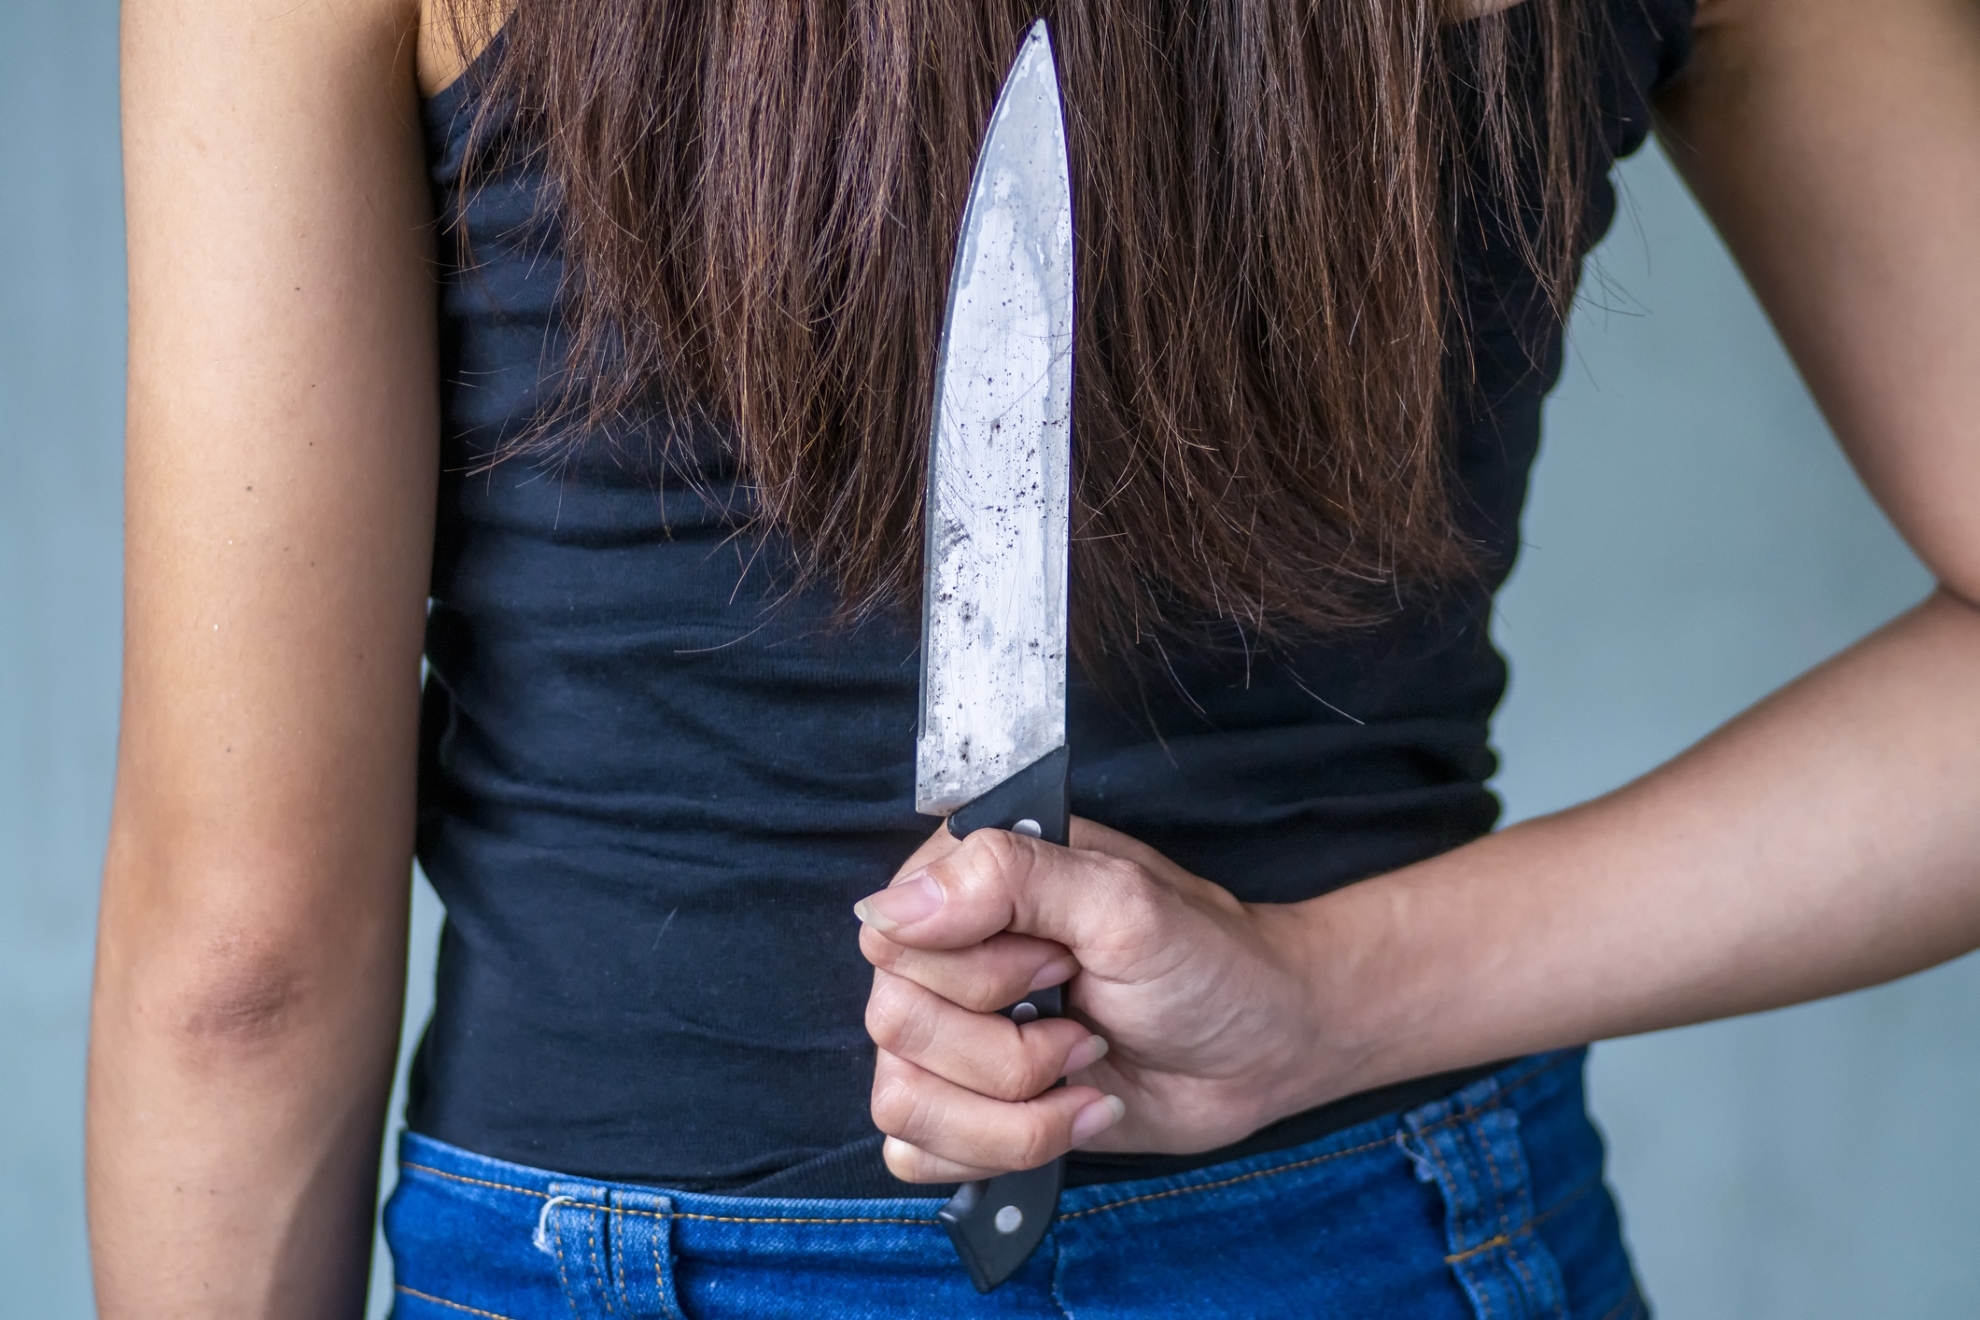 A woman hides a knife behind her back.